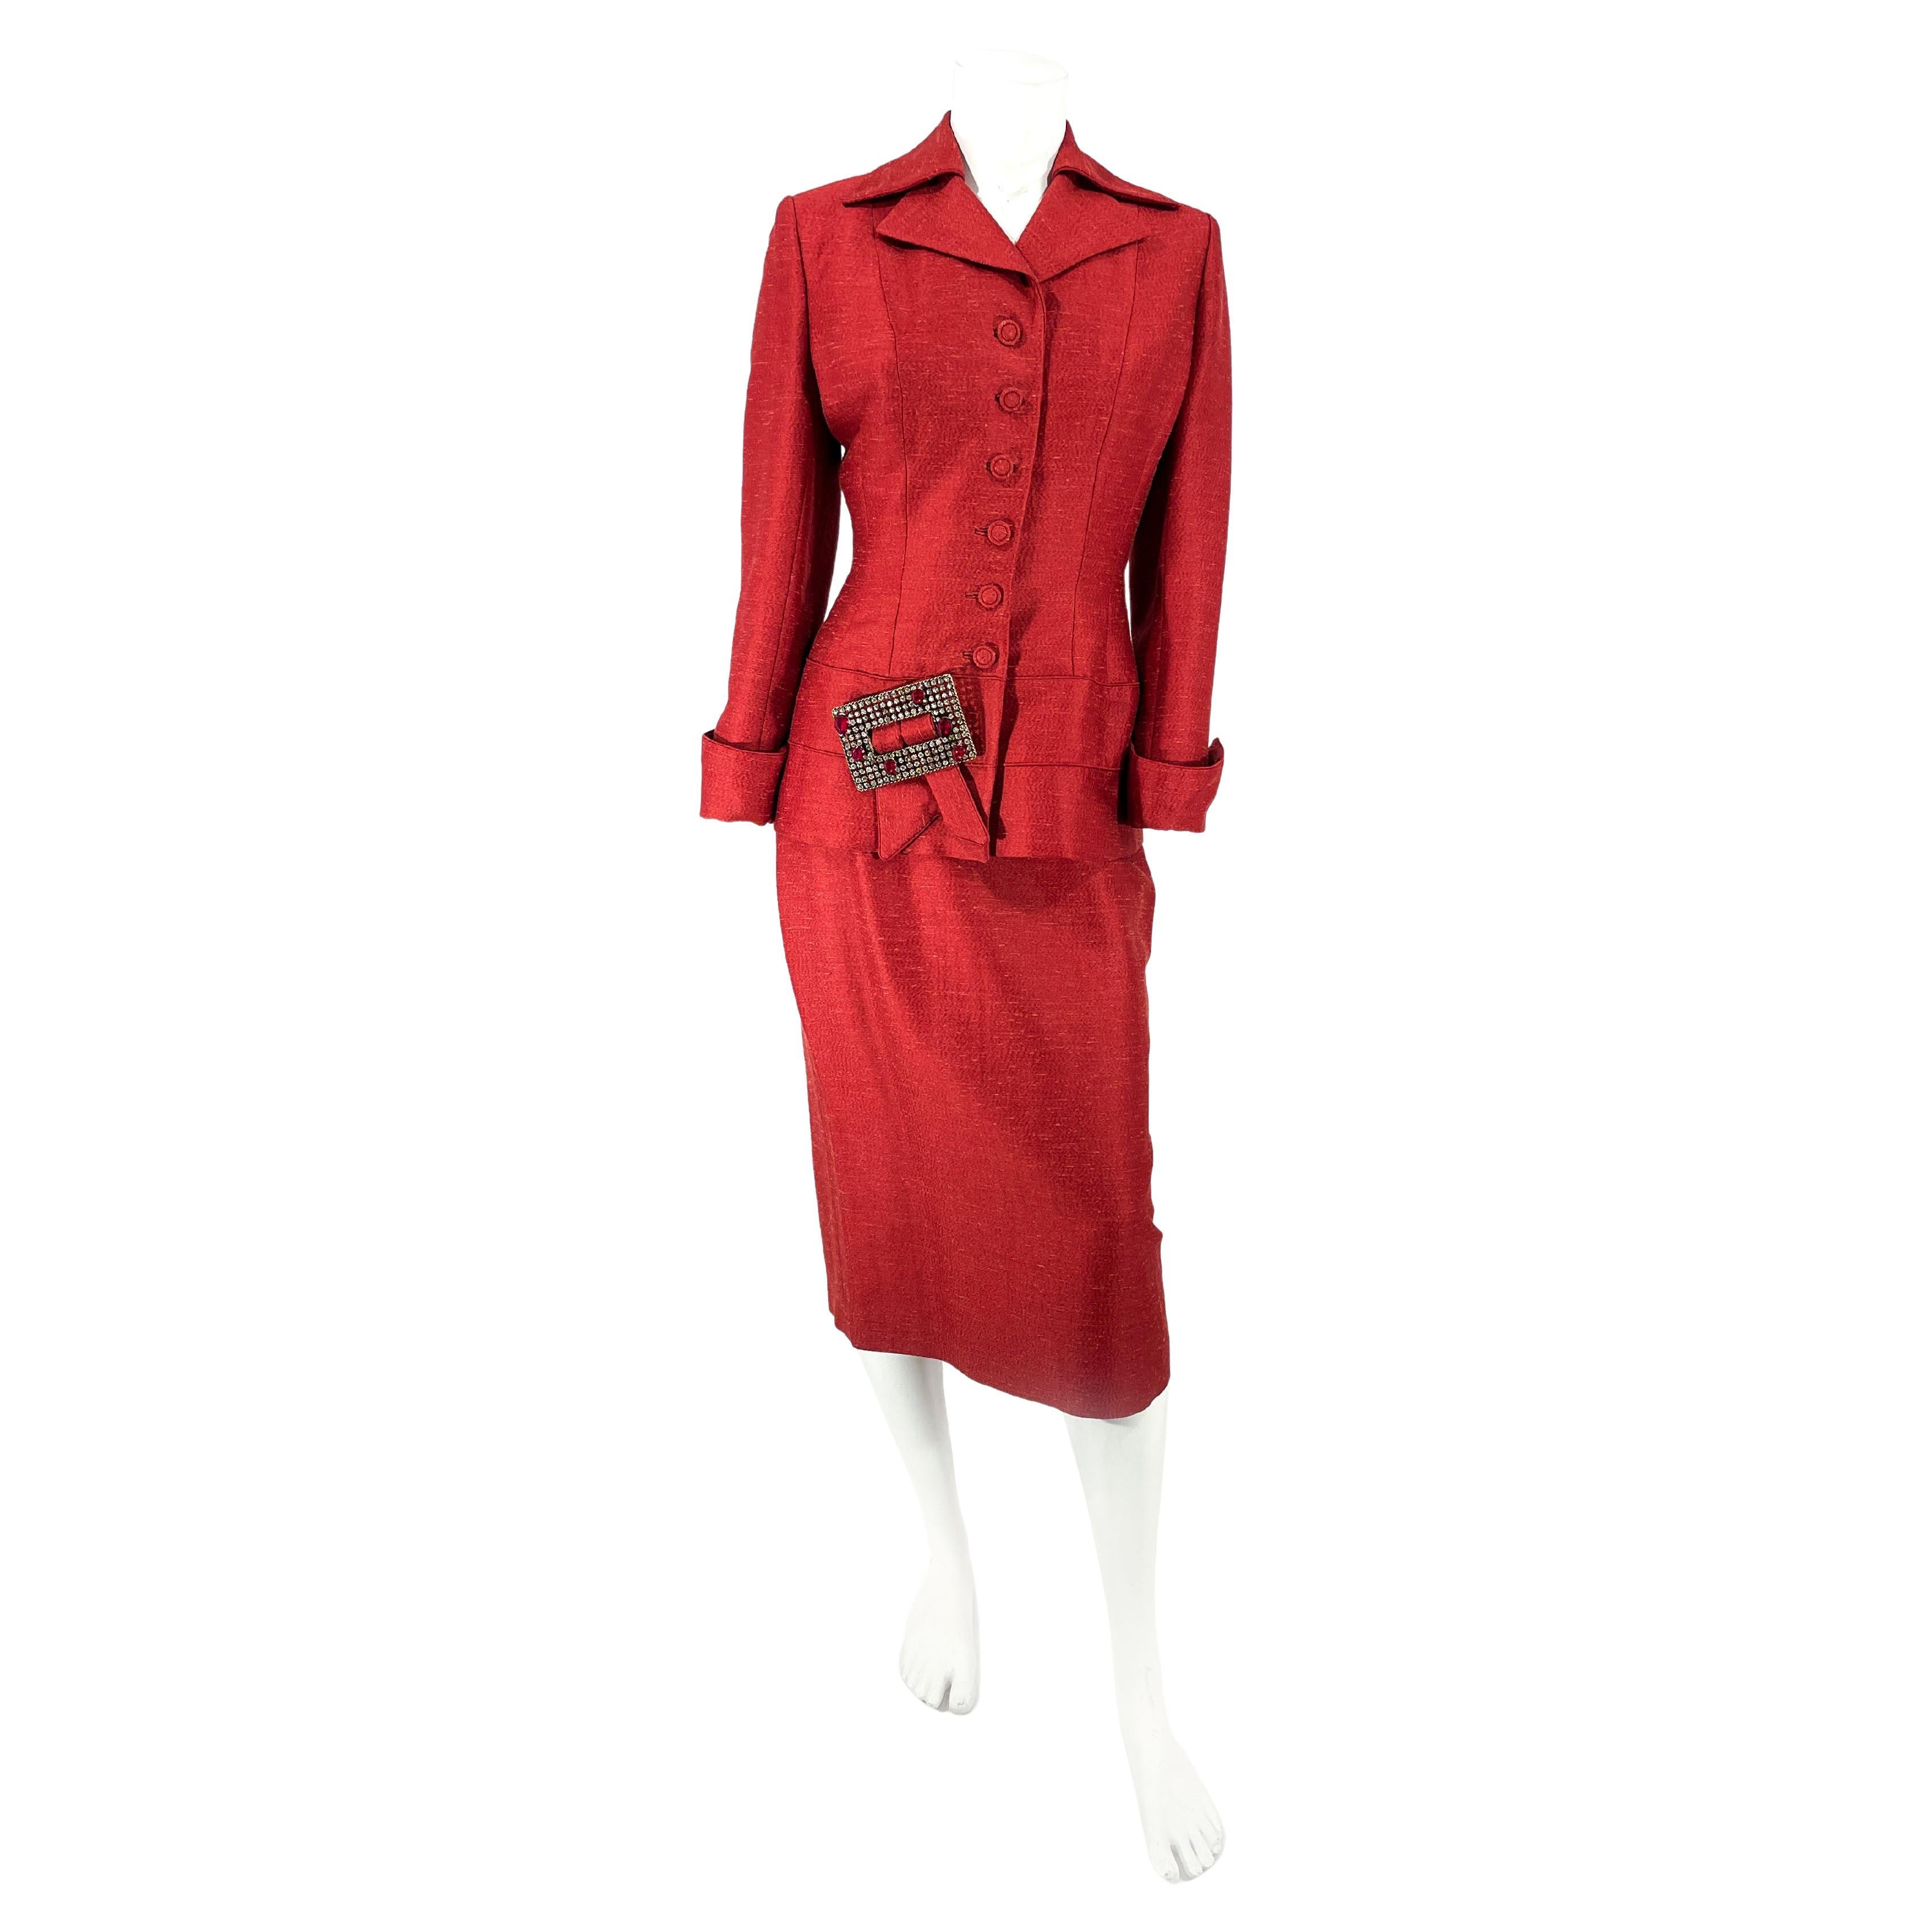 1950s Red Lilli Ann Suit with Rhinestone Buckle Accent For Sale